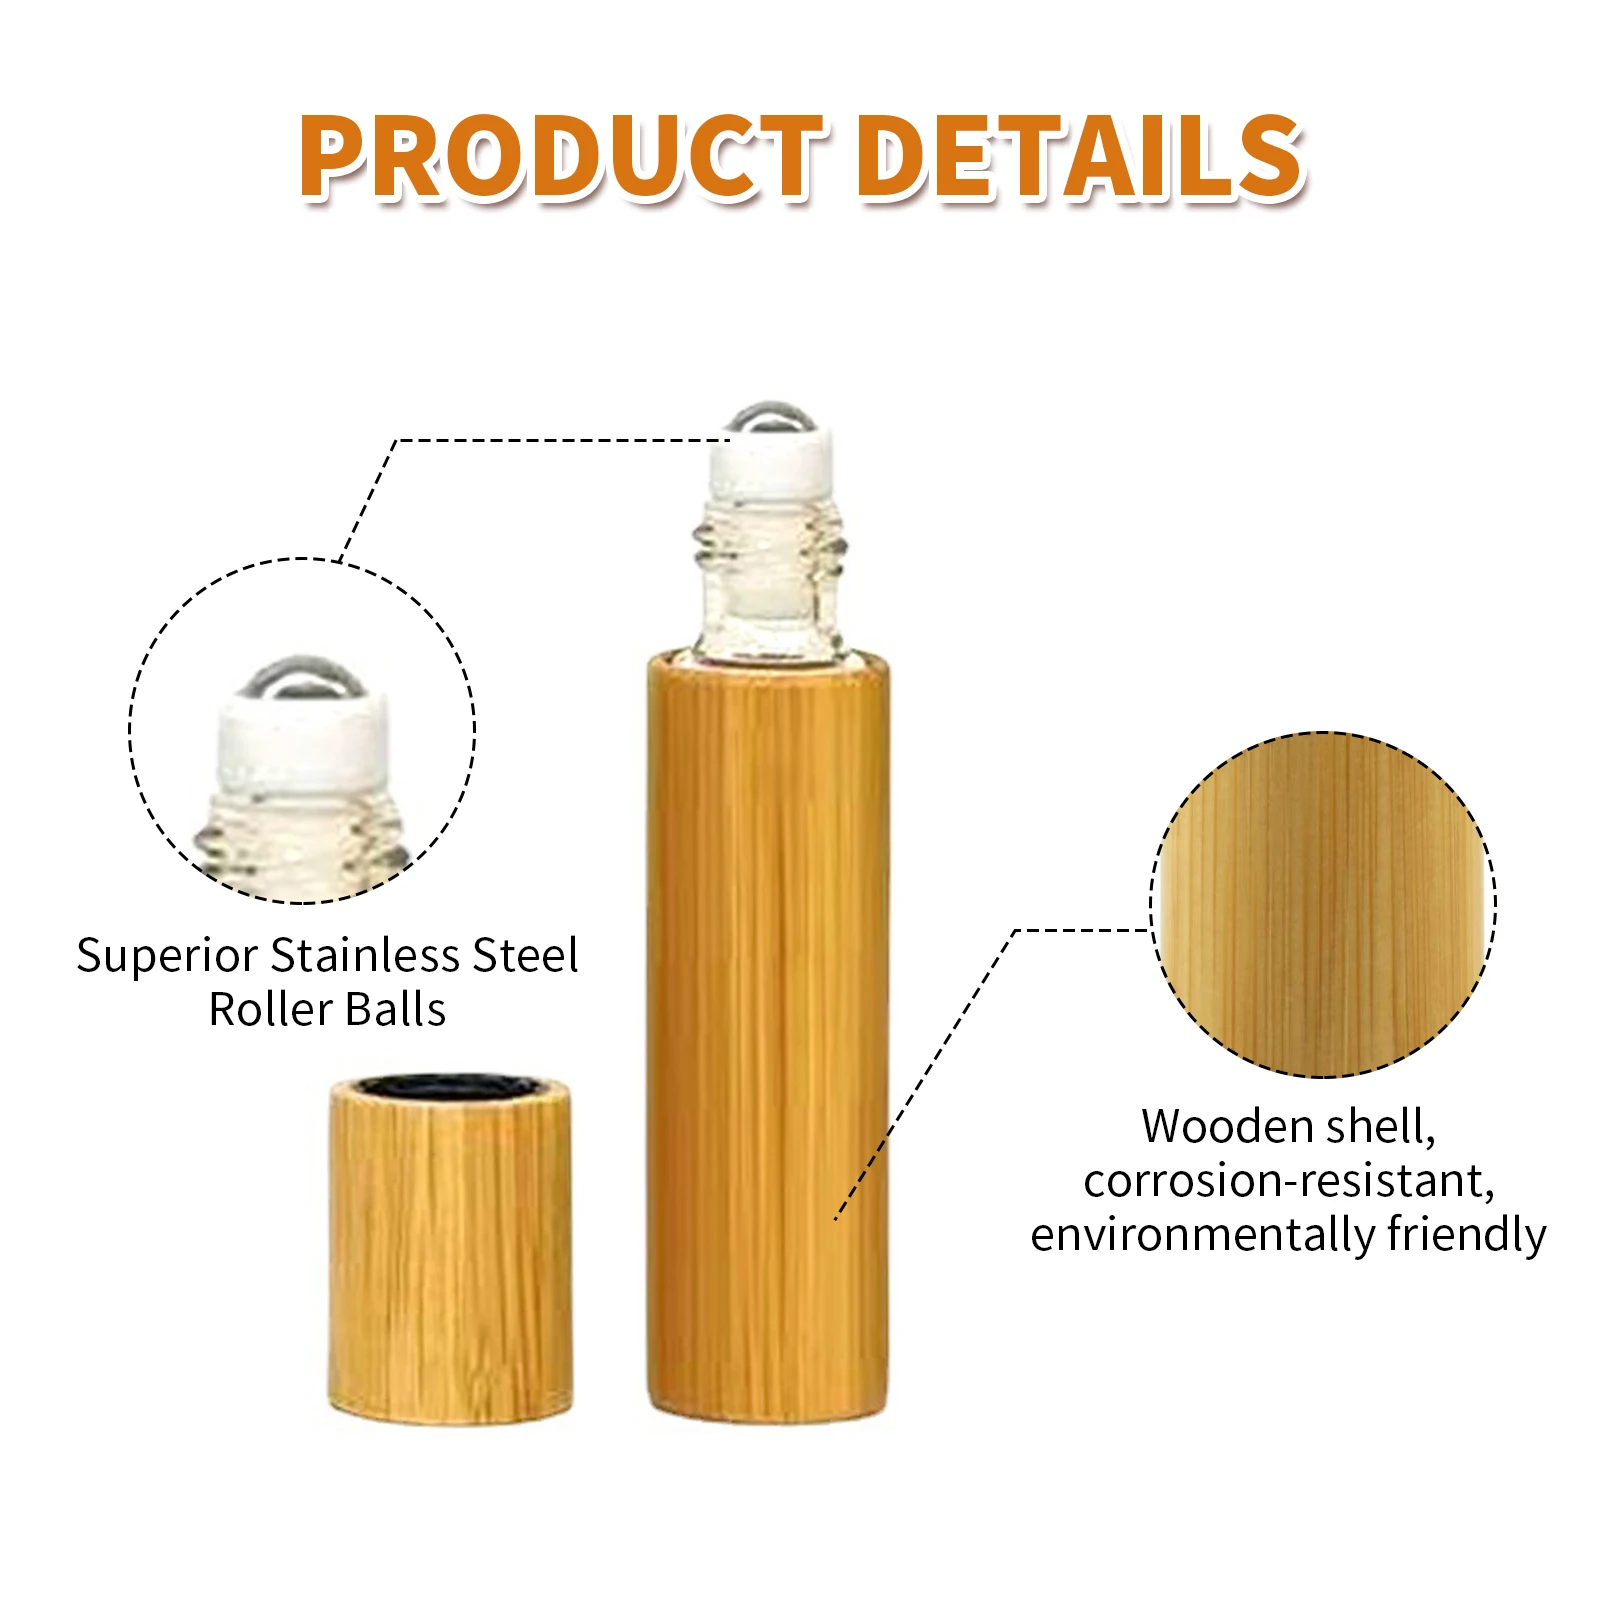 1ml 2ml 3ml 5ml 10ml  refillable bamboo roll on bottle essential oil clear glass roller bottle with bamboo cap H0e832a84ce2548a3bf9ccf86d1313f53i